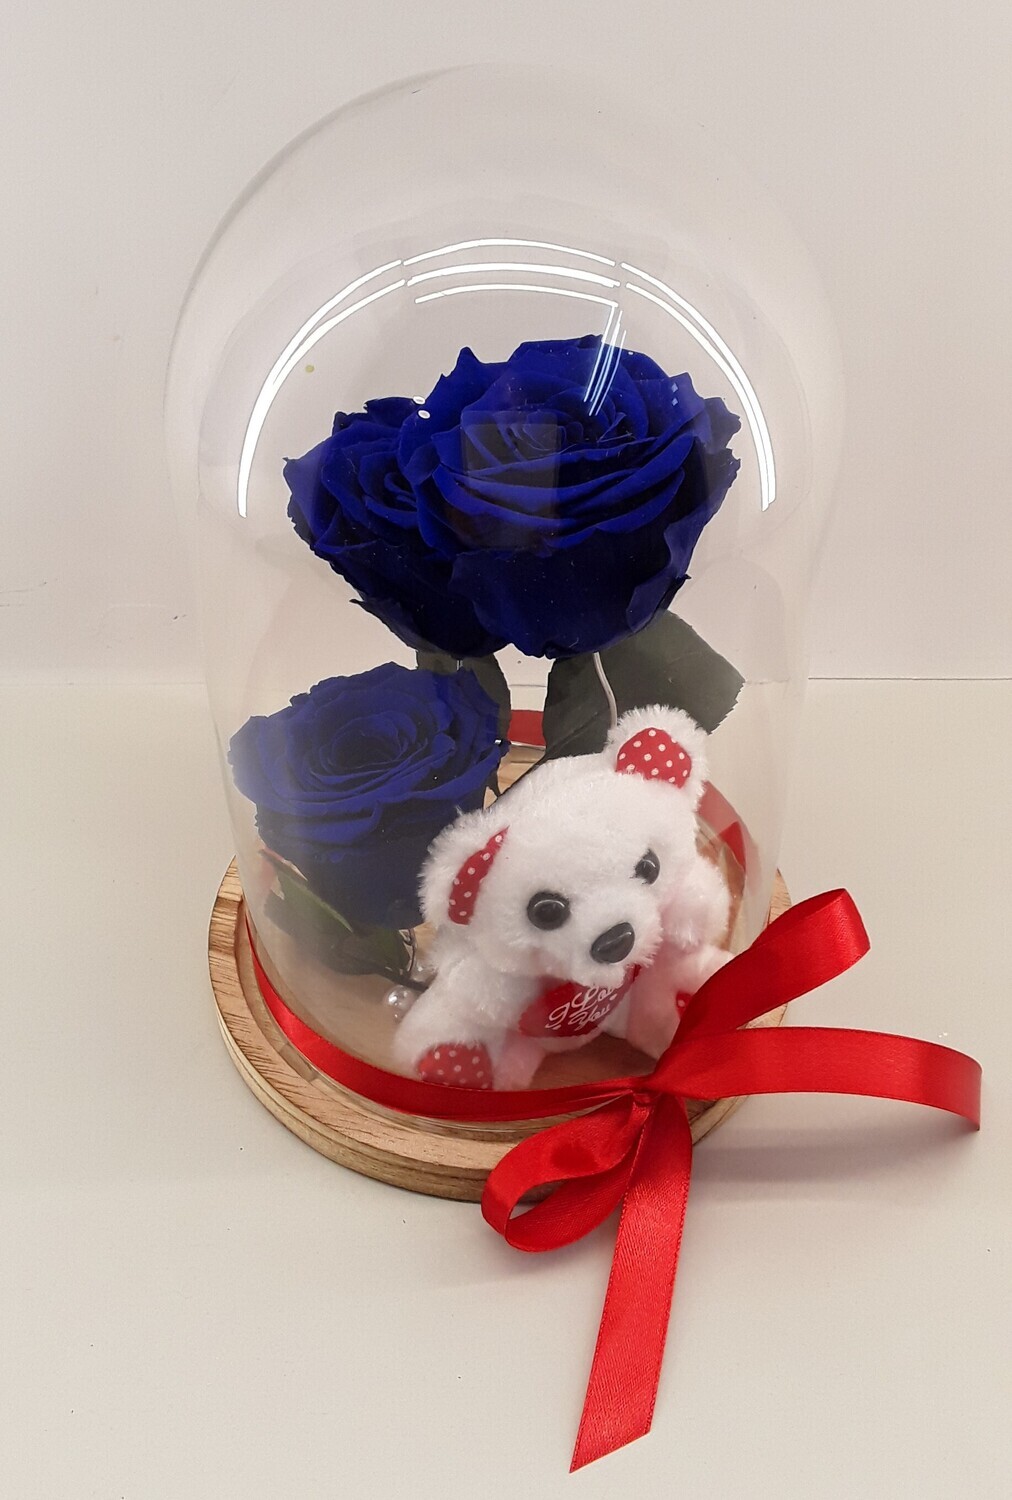 F38--Blue forever roses with small teddy bear in glass!!!